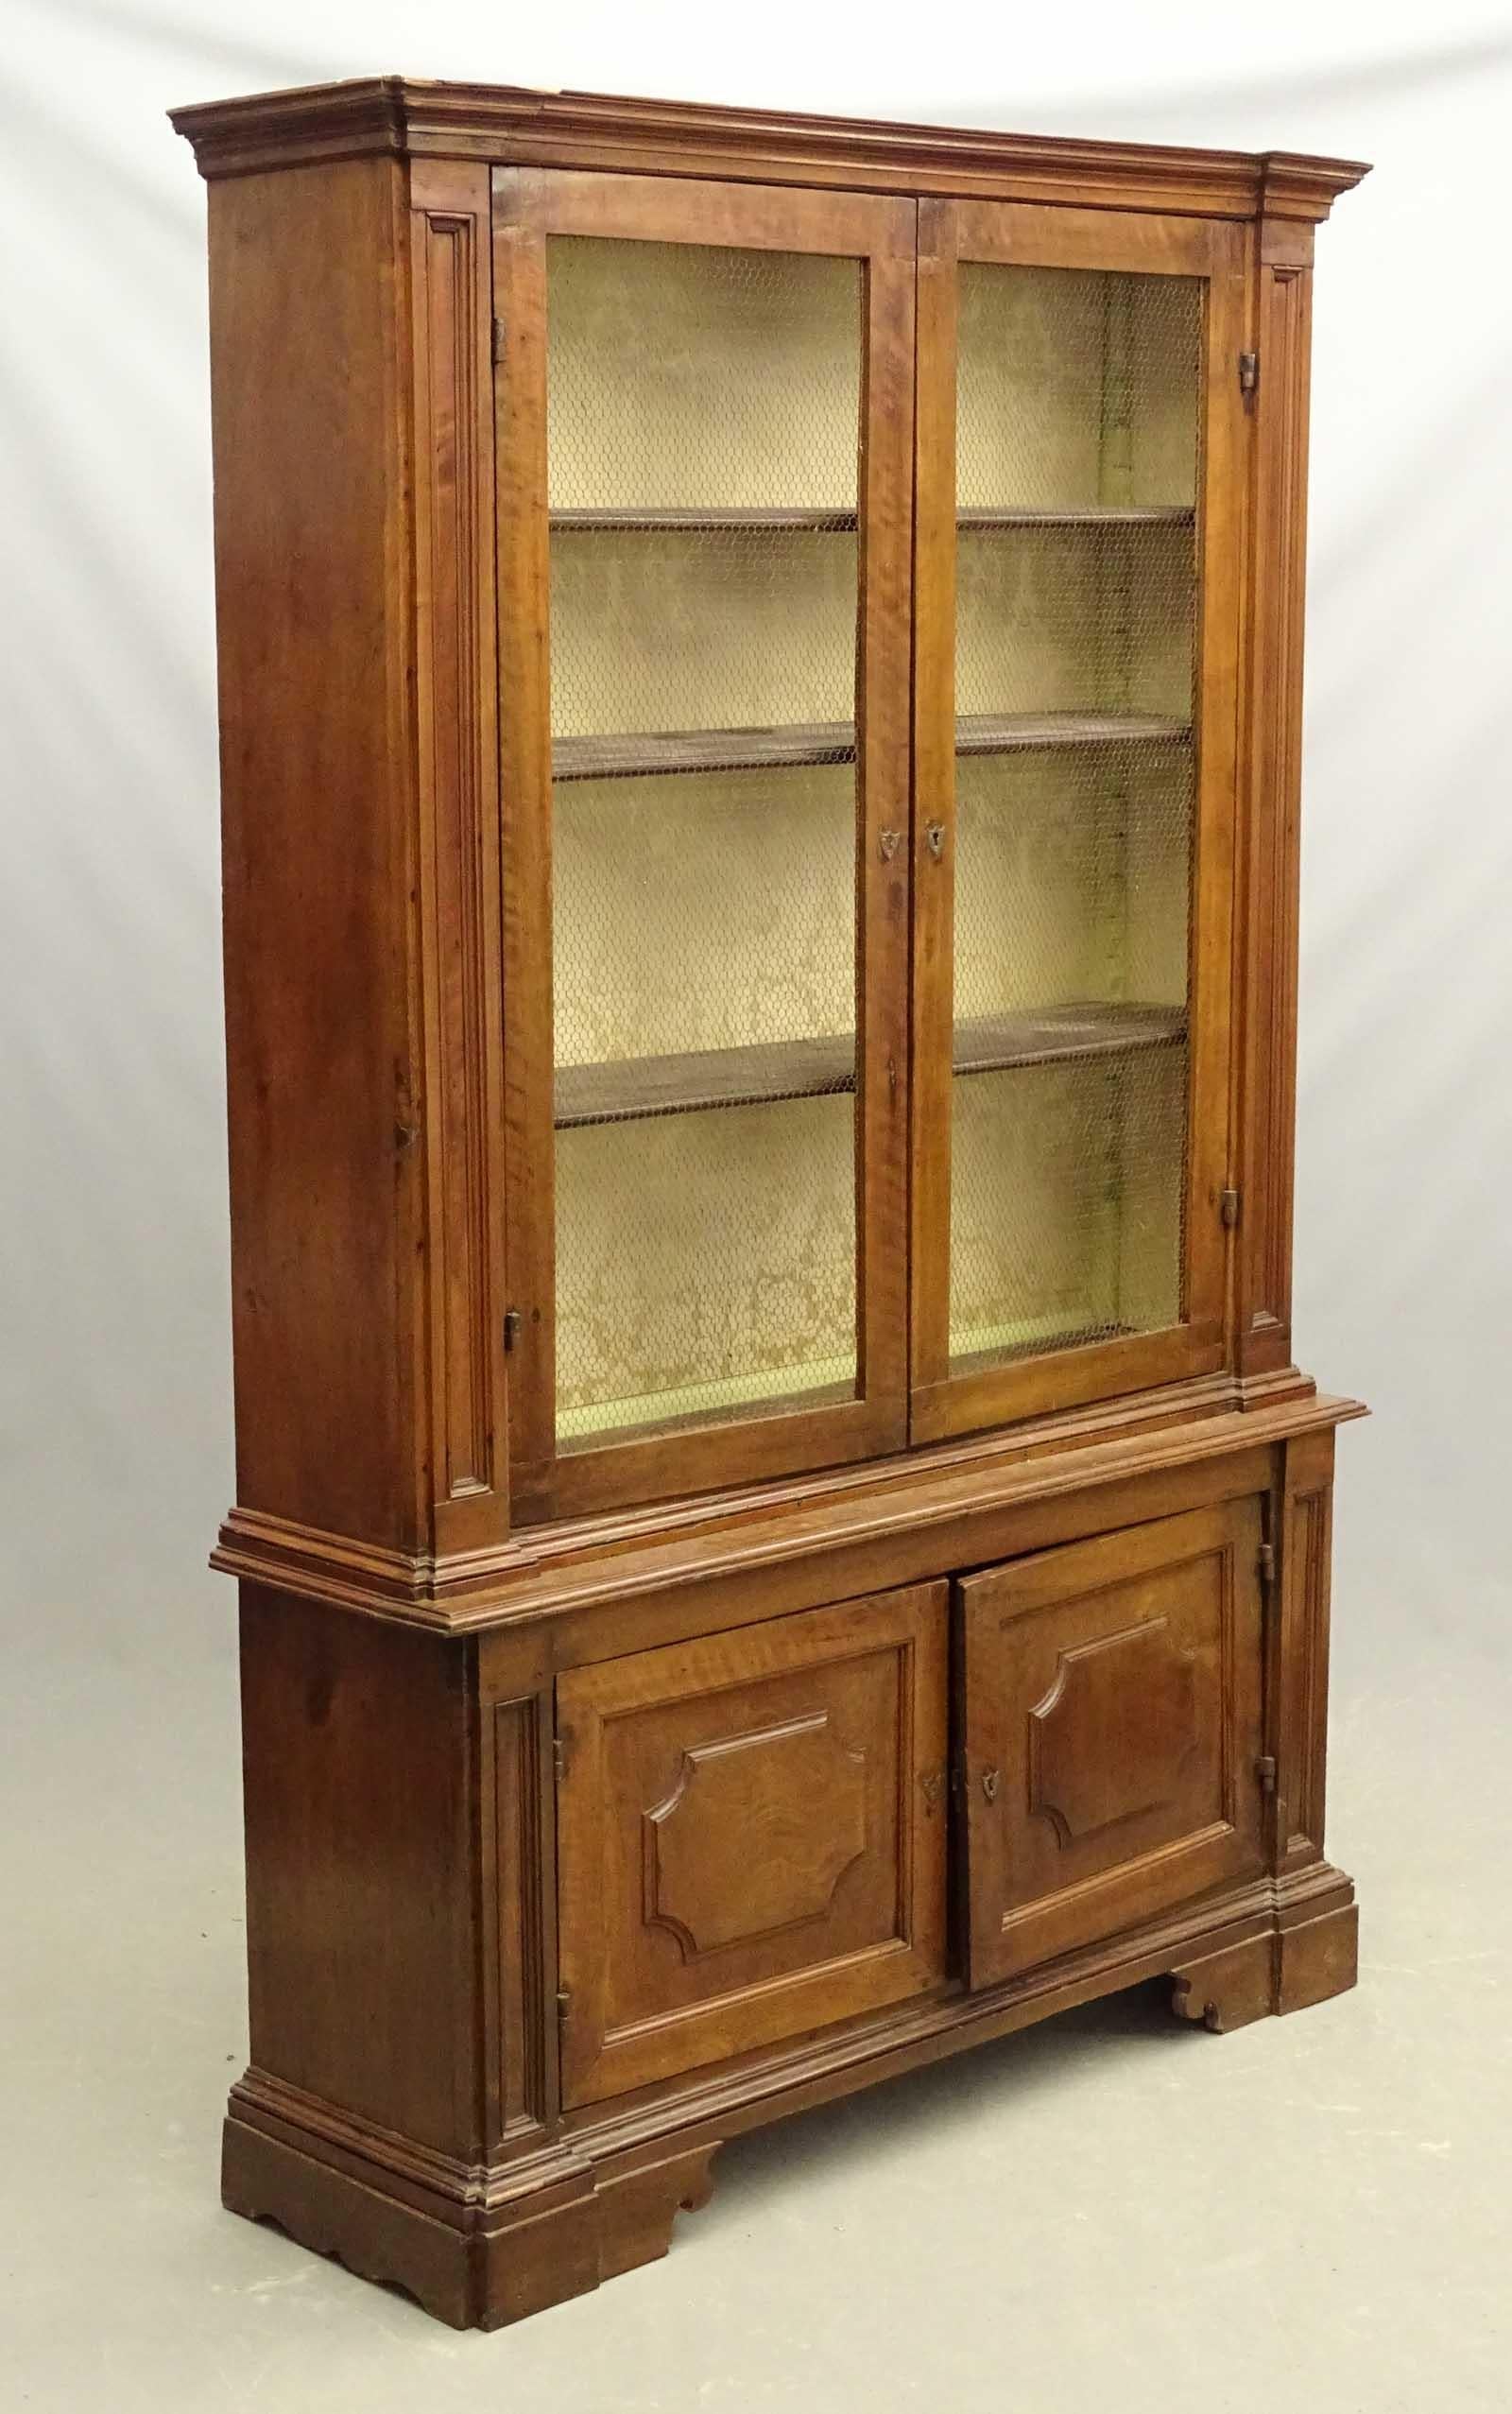 French Empire Bookcase in Walnut In Good Condition For Sale In Doylestown, PA